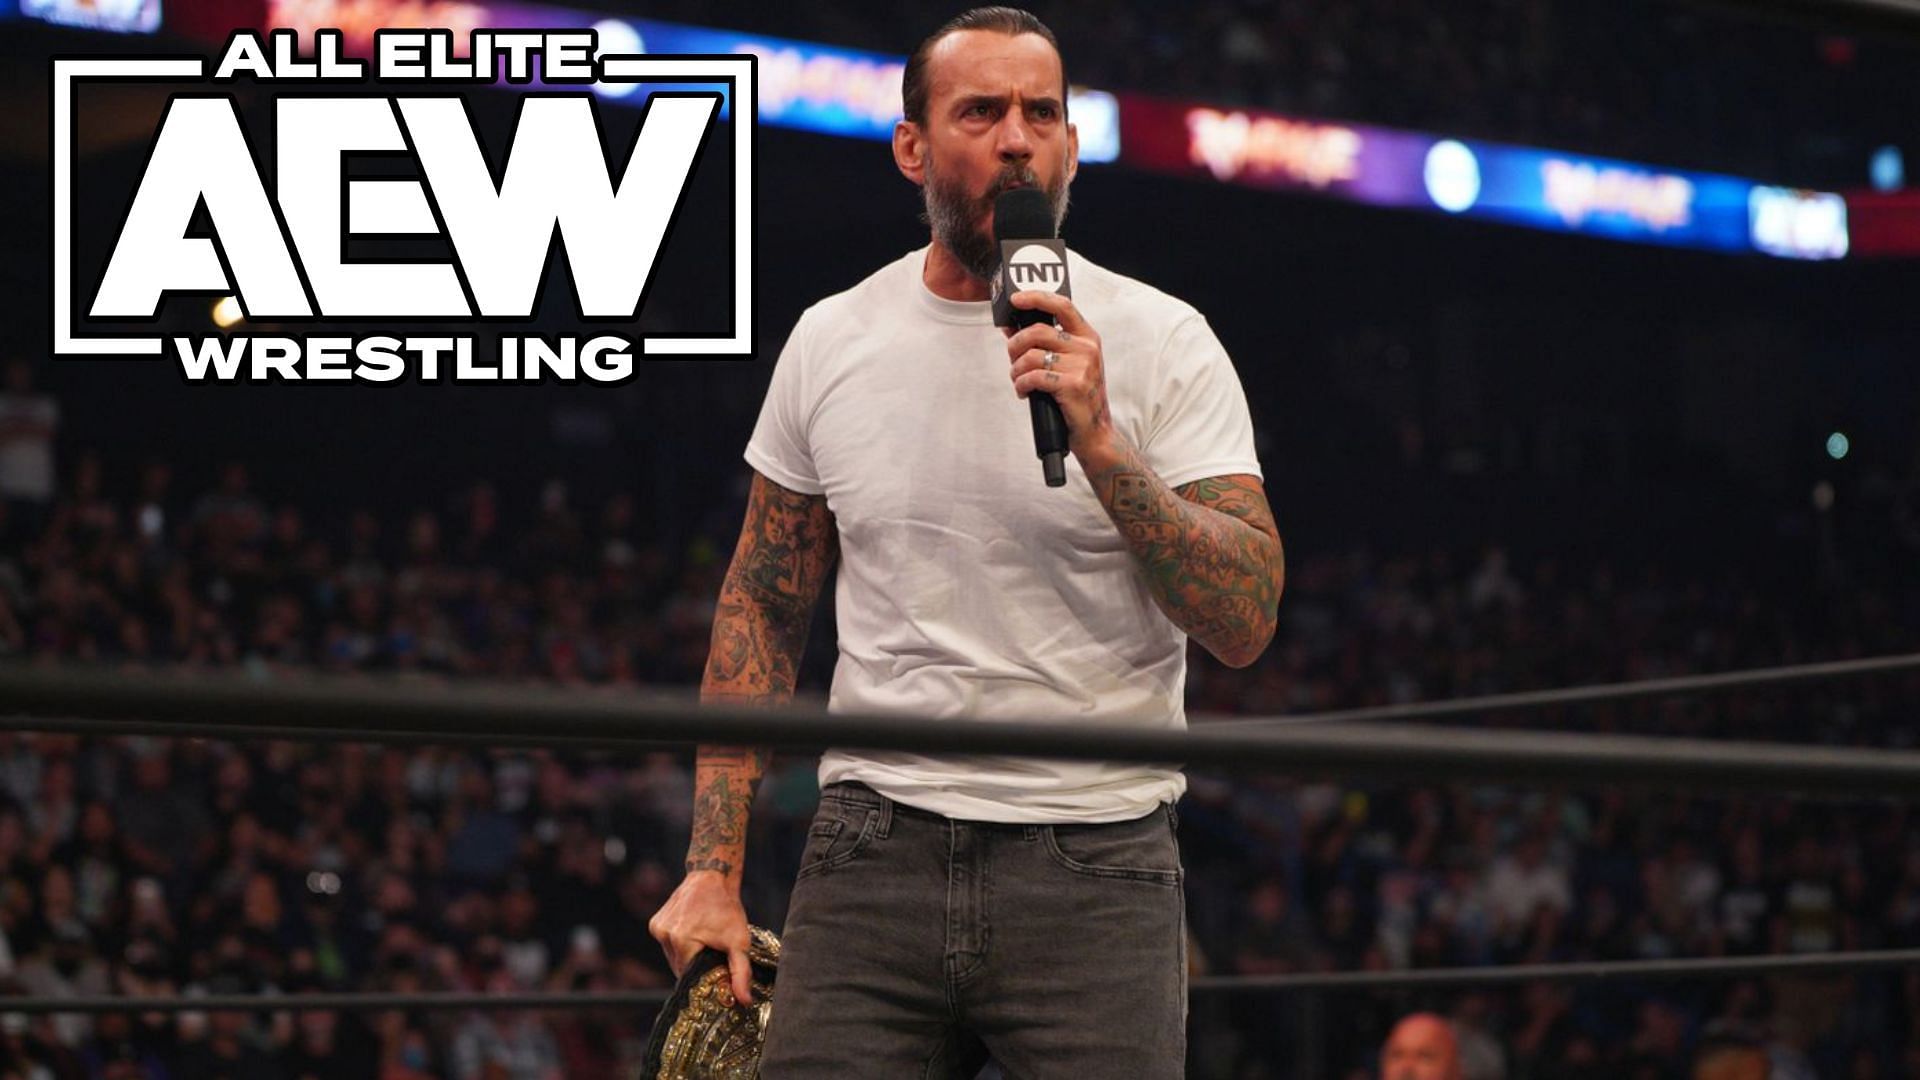 Could this star end up facing off with CM Punk in AEW upon his return?